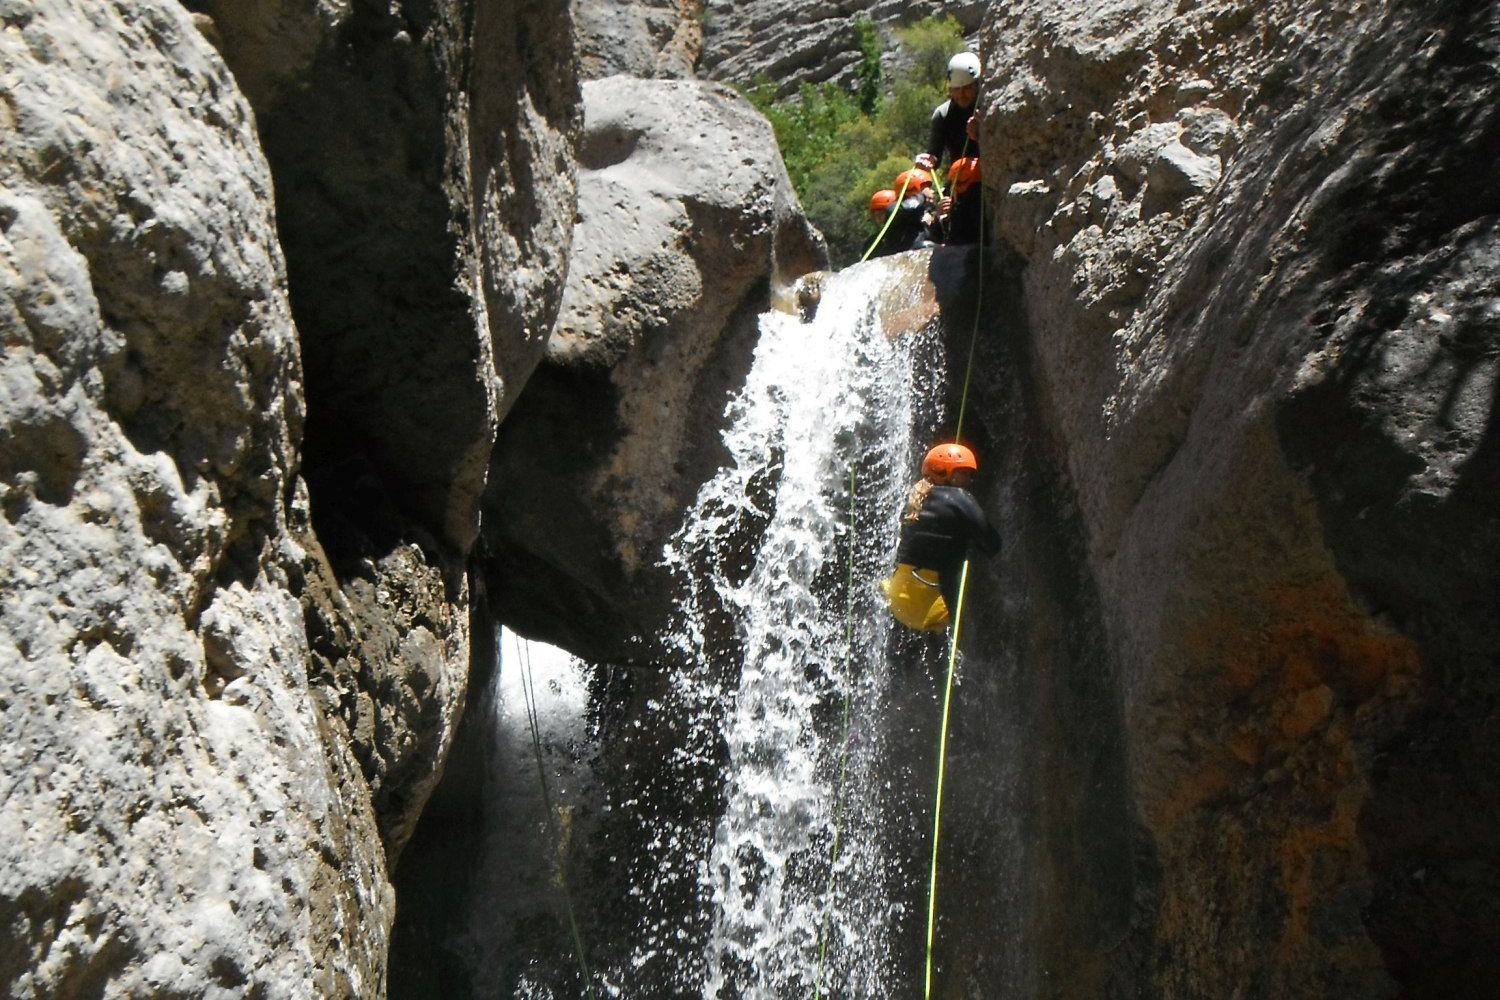 Group abseiling down a waterfall, Catalonia